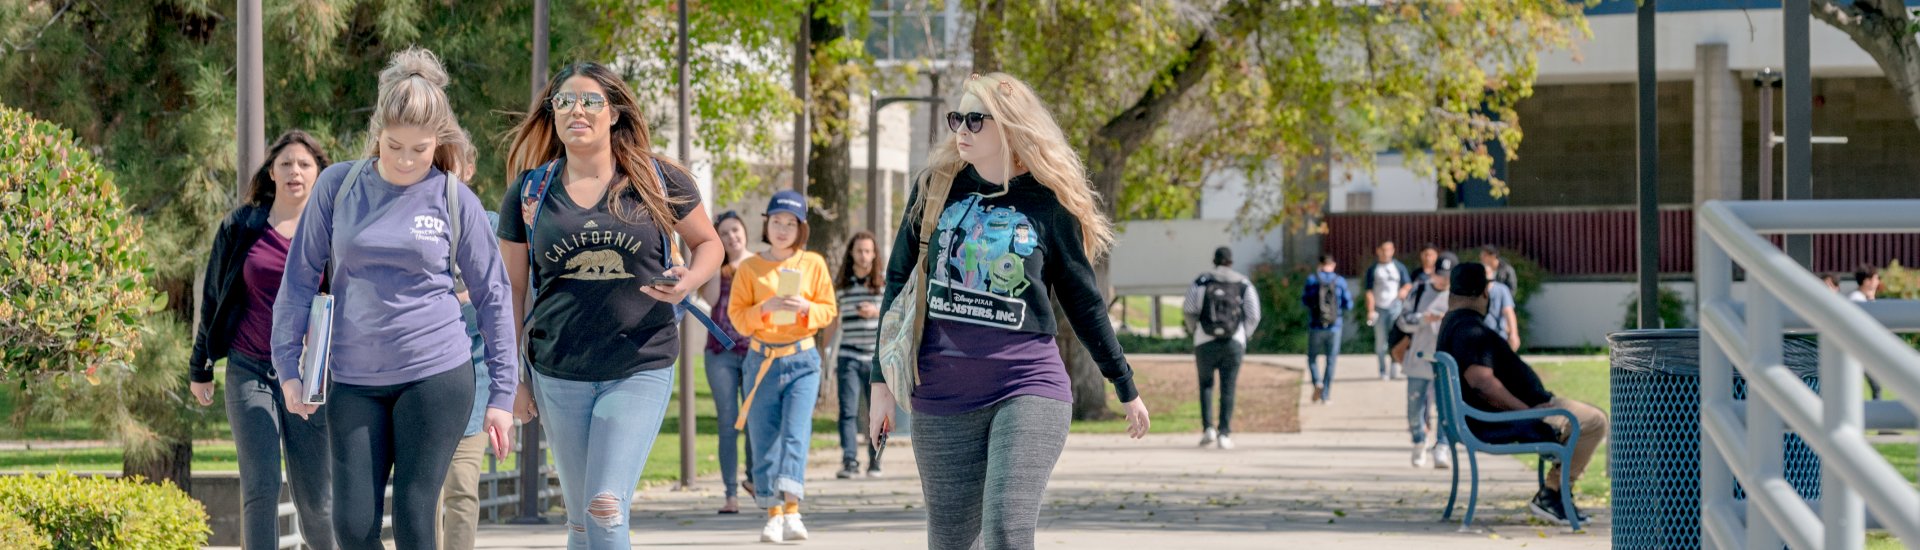 Students walking on campus, the Lecture Hall building in the background